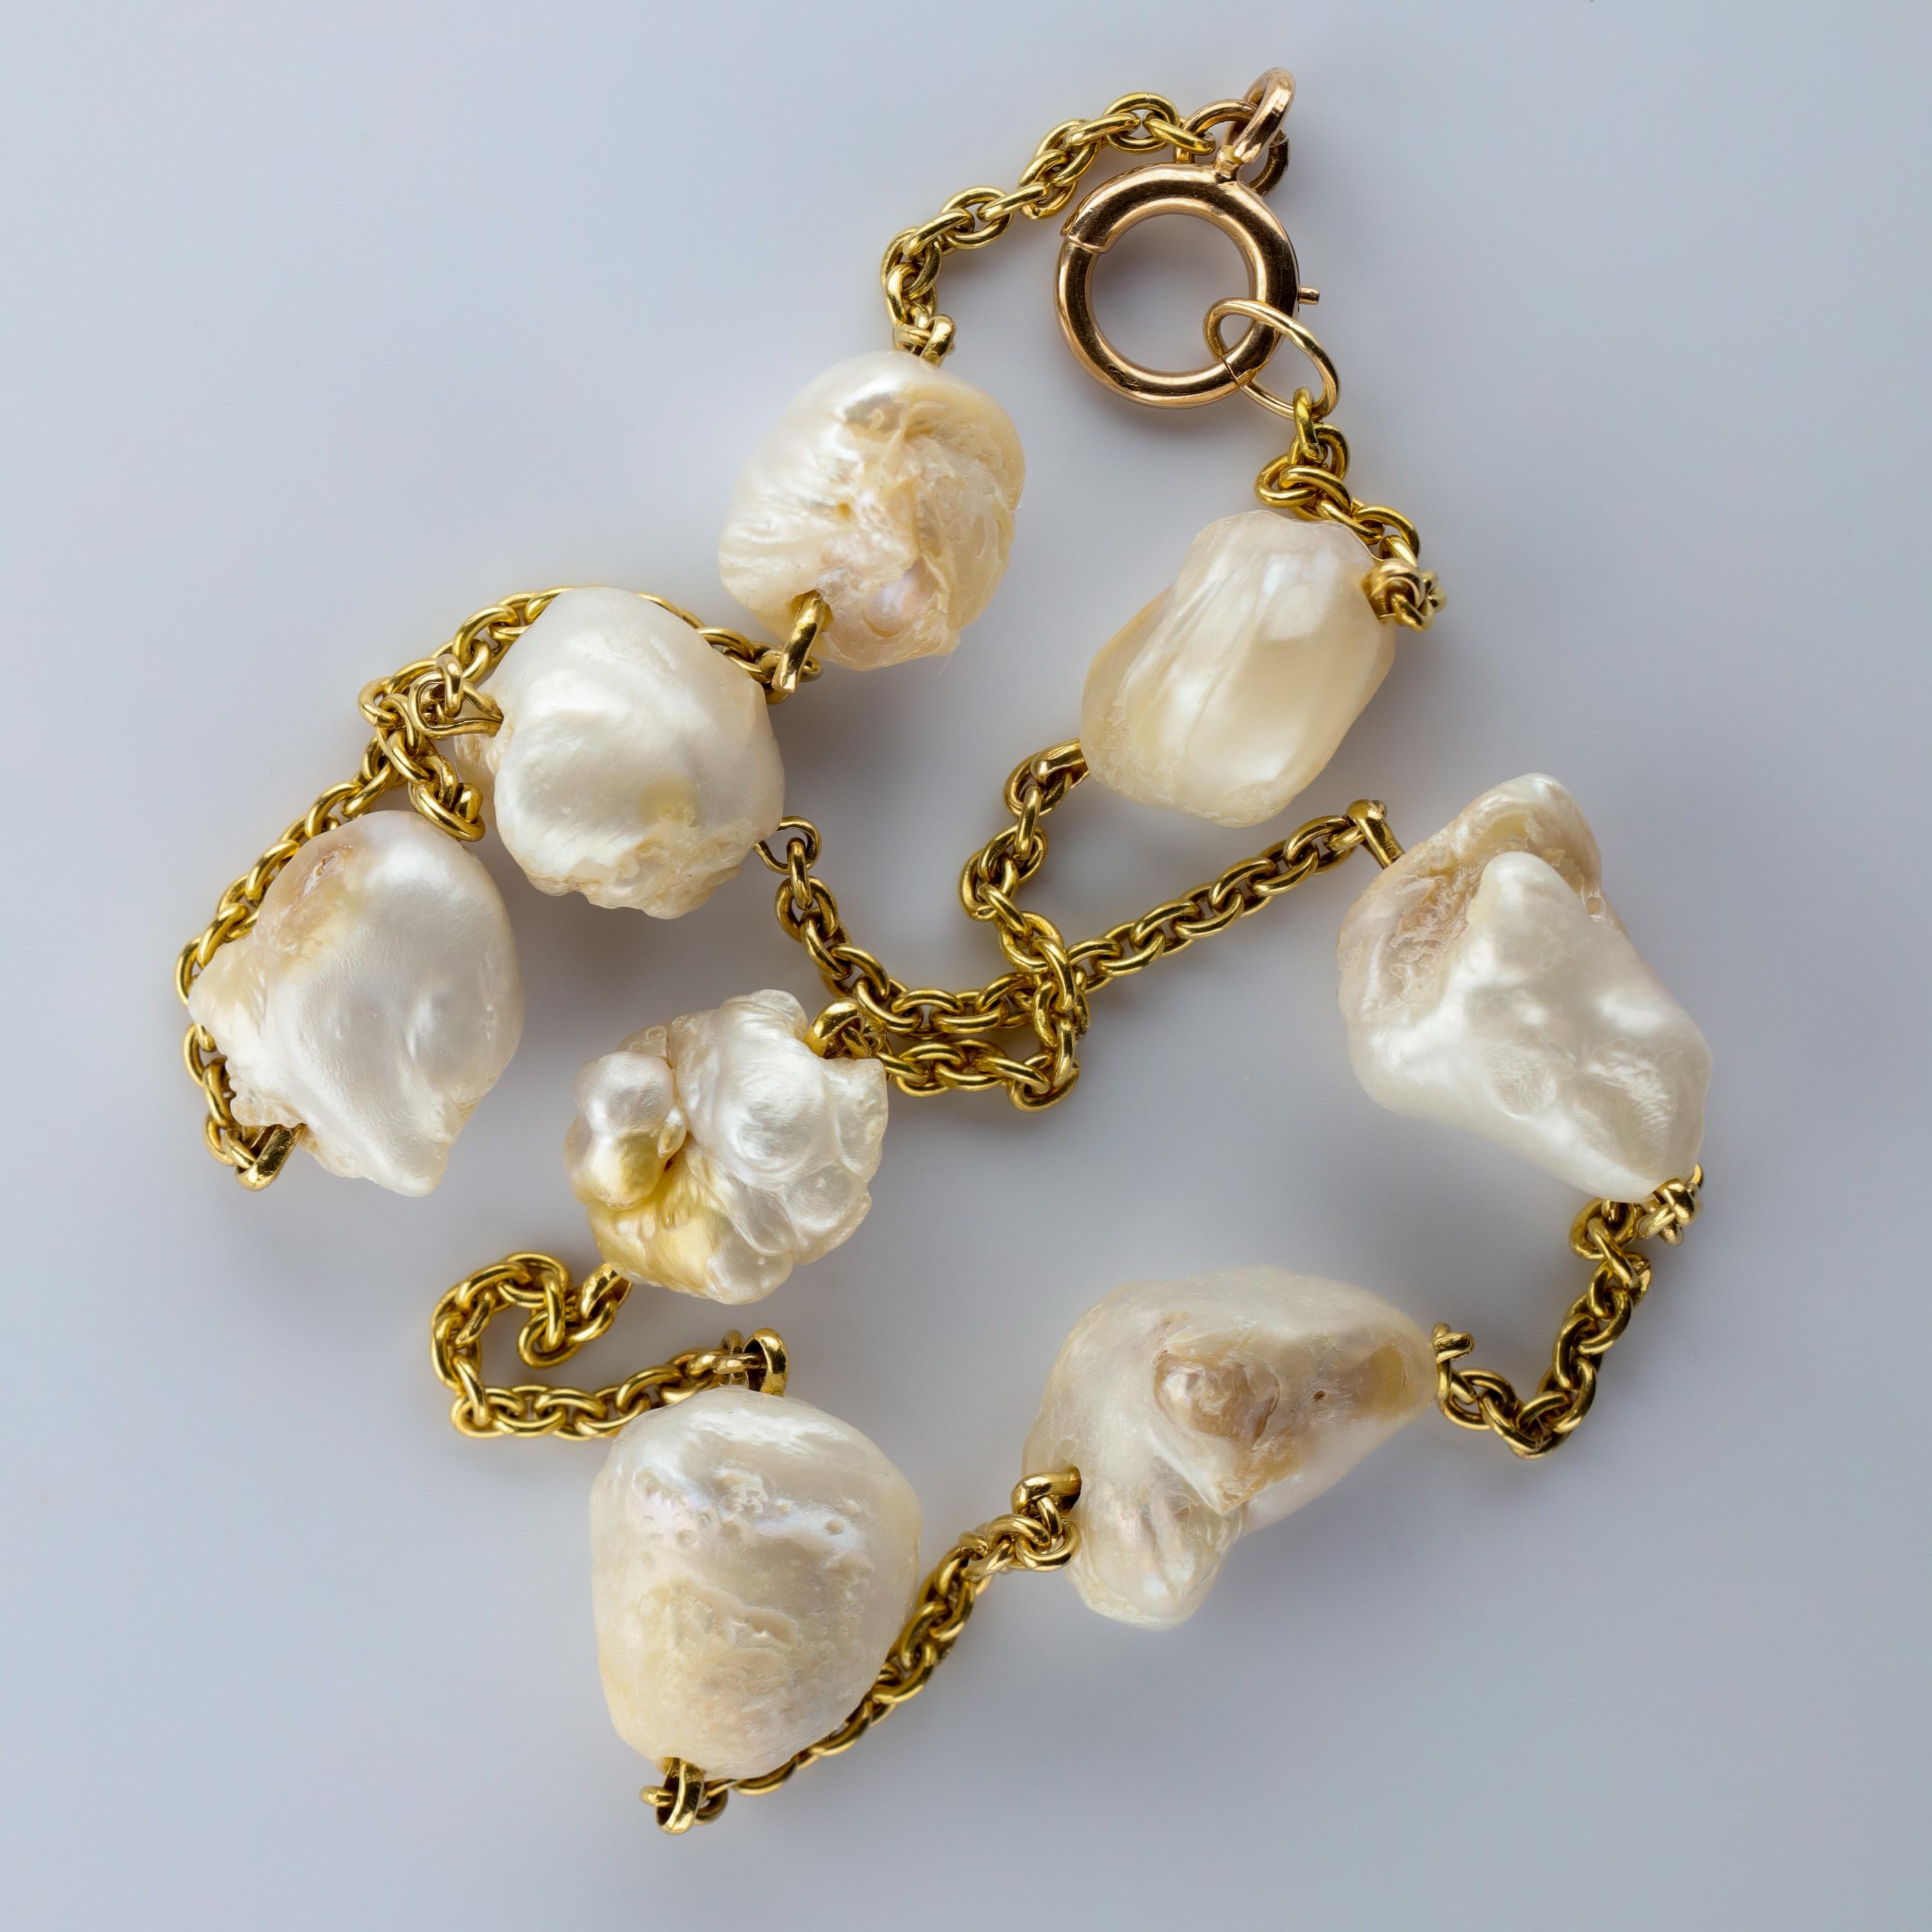 Pearl Necklace of Rare Oversized Mississippi River Pearls 5